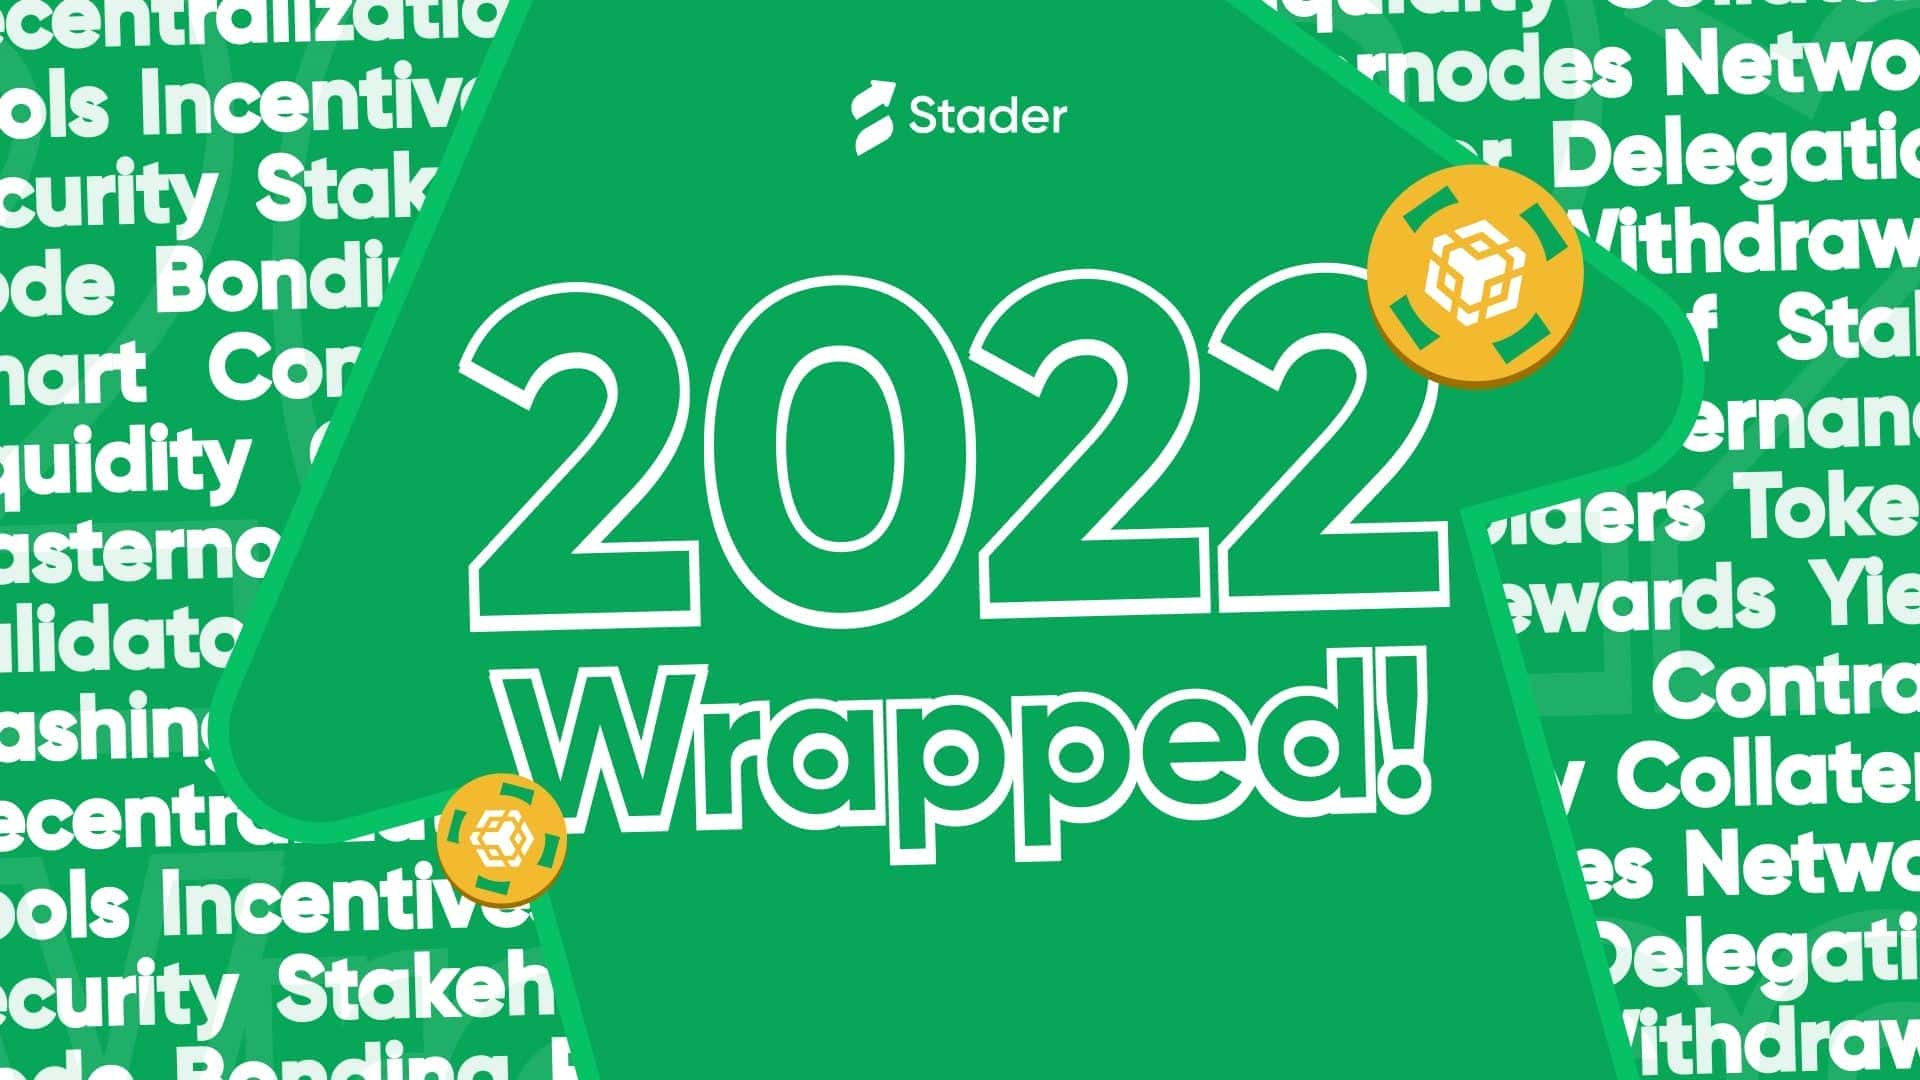 Stader 2022 Wrapped: What We Accomplished Together